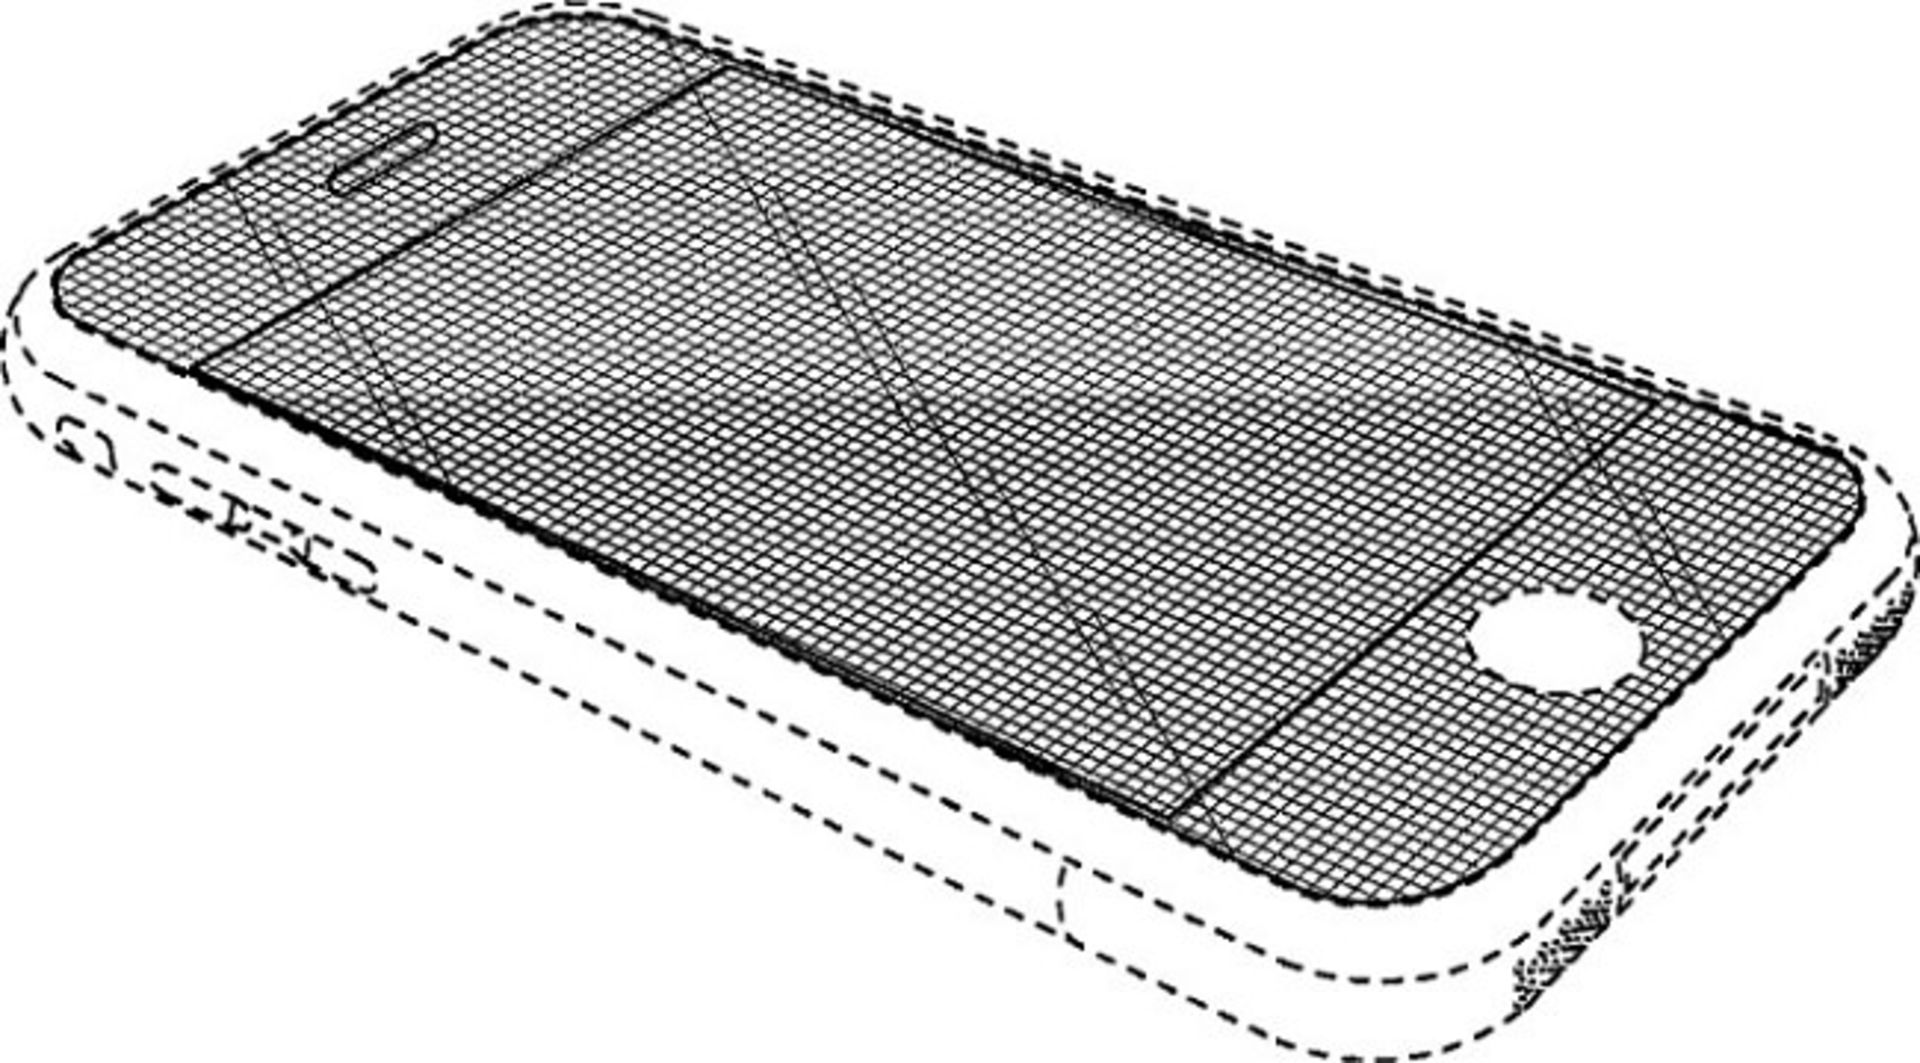 iphone-curved-display-patent-drawing